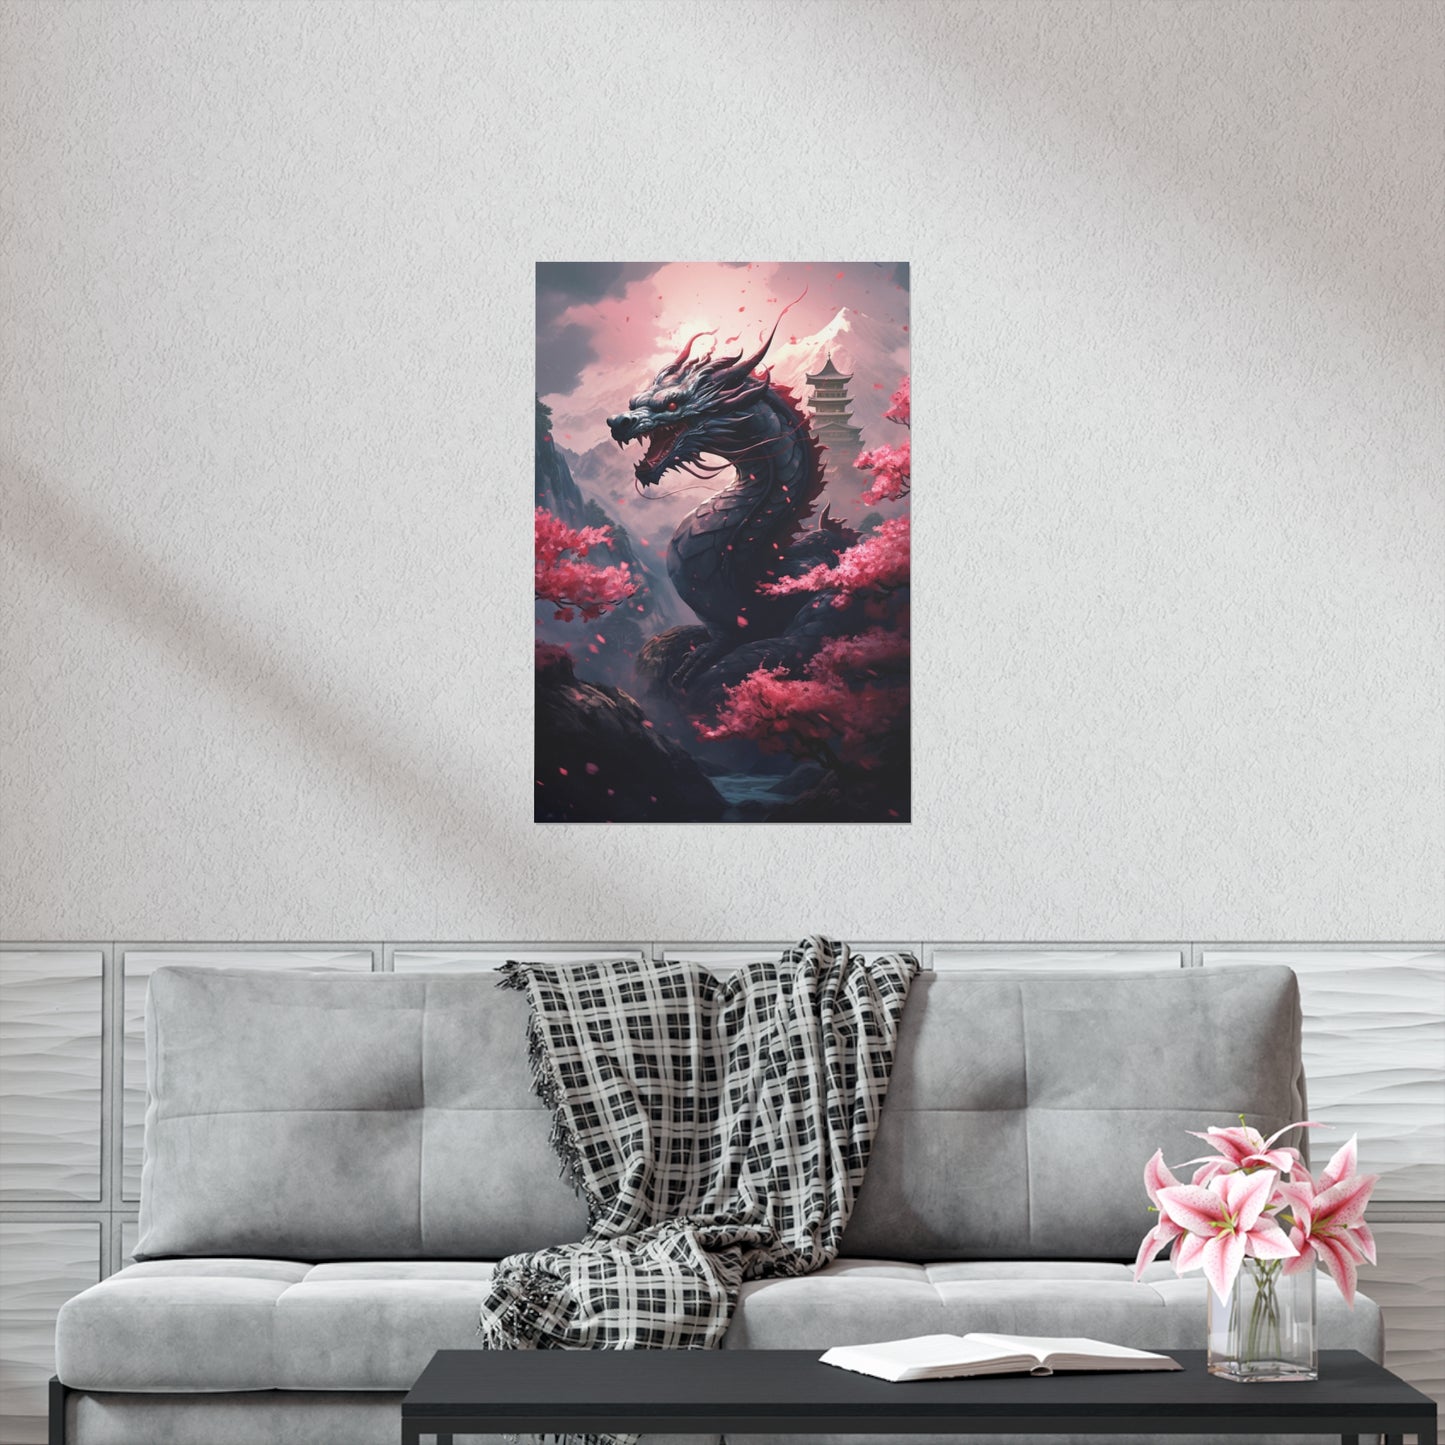 Japanese Dragon Poster Print, Cherry Blossom Picture Photo Wall Image Art Vertical Paper Artwork Small Large Cool Room Office Decor Starcove Fashion